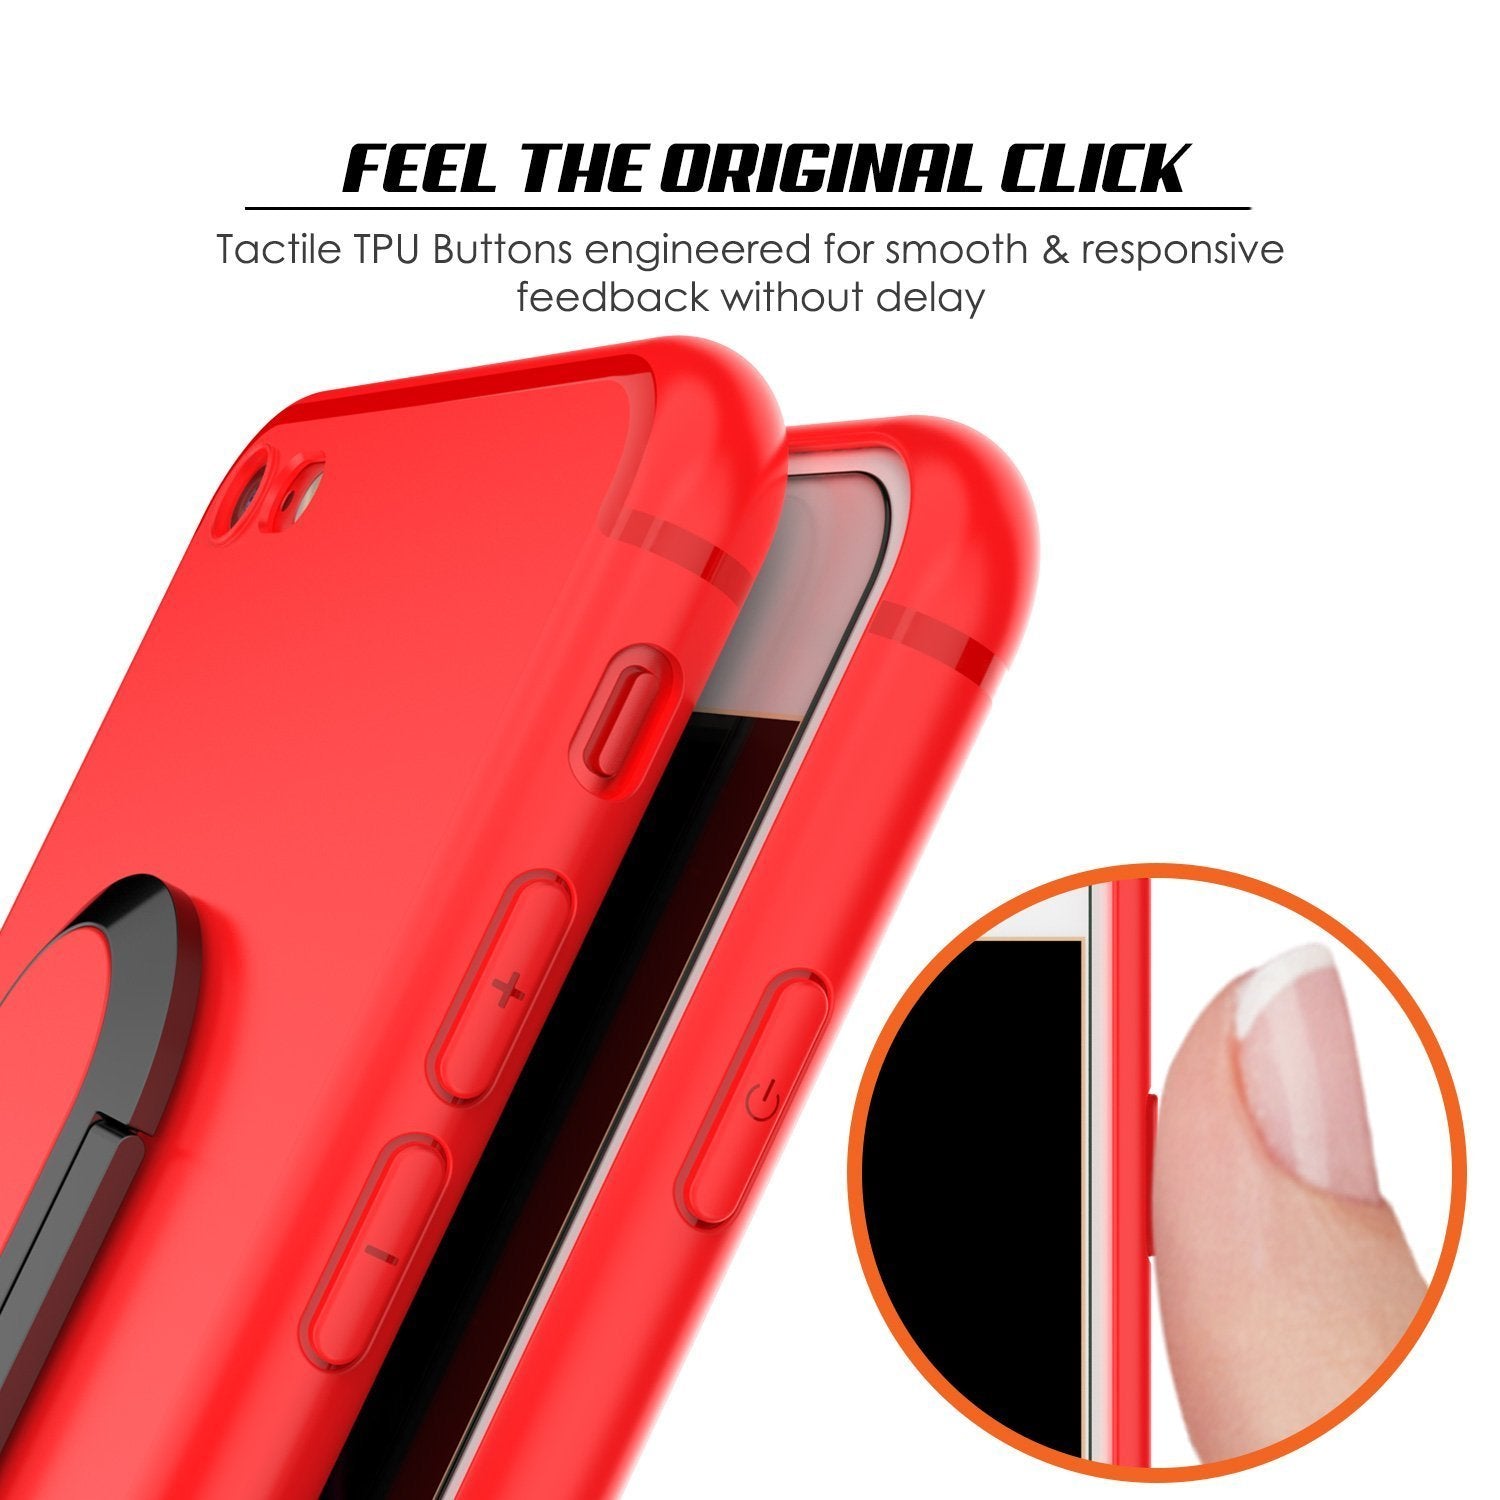 iPhone 8 Case, Punkcase Magnetix Protective TPU Cover W/ Kickstand, Ring Grip Holder & Metal Plate for Magnetic Car Phone Mount PLUS Tempered Glass Screen Protector for Apple iPhone 6 /7 & 8 [red]